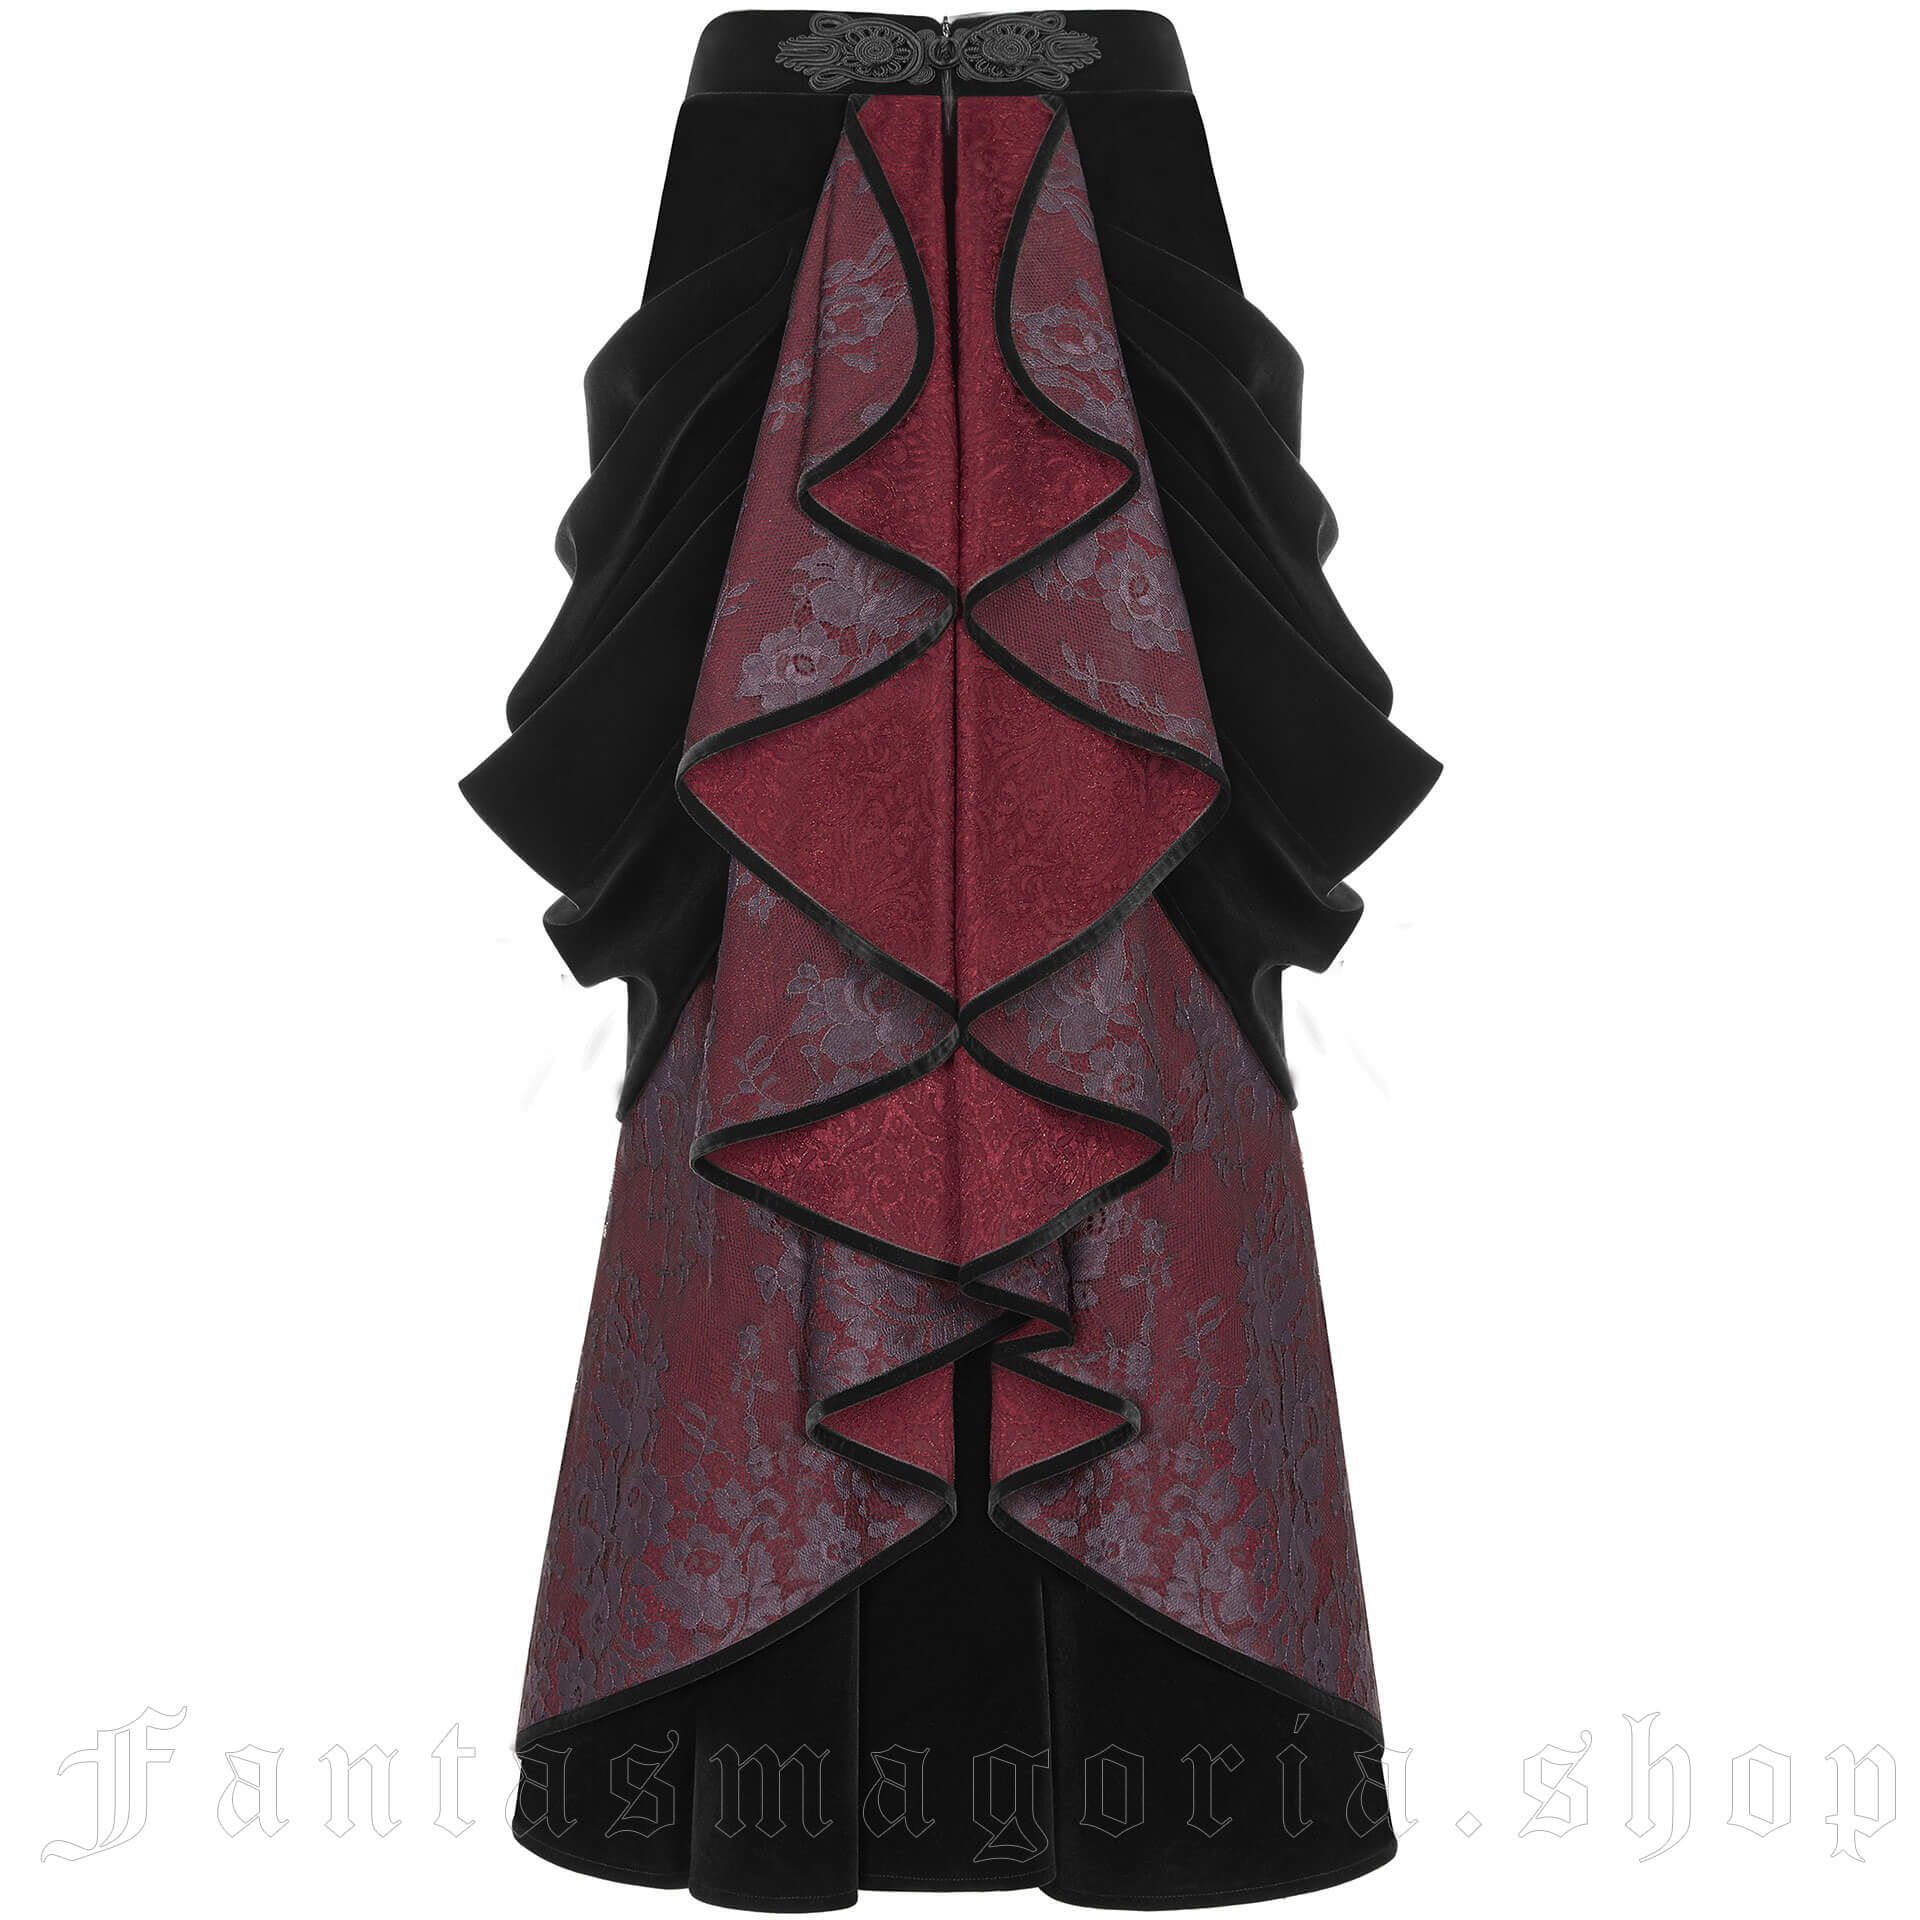 Red And Black Stripes Brocade Gothic Burlesque Corset Overbust Bustier  Manufacturer, Exporter, Supplier